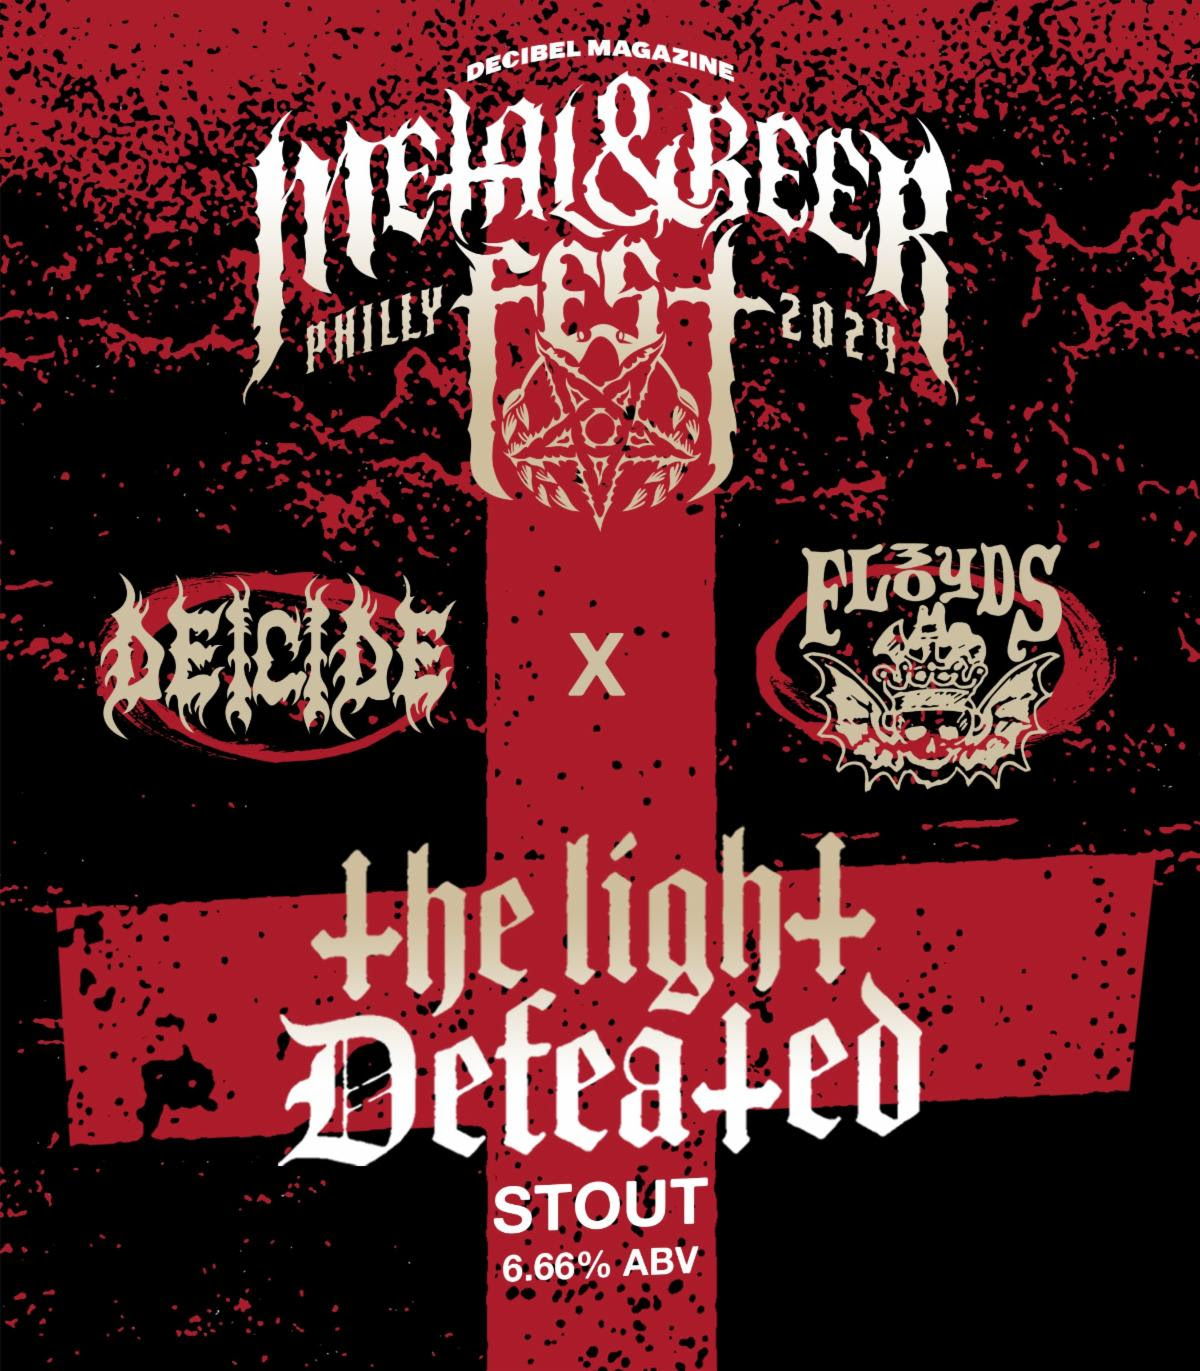 Deicide Teams Up With Craft Beer Masters 3 Floyds  Debuts The Light Defeated Stout  at Decibel Magazine Metal & Beer Fest April 12 – 13